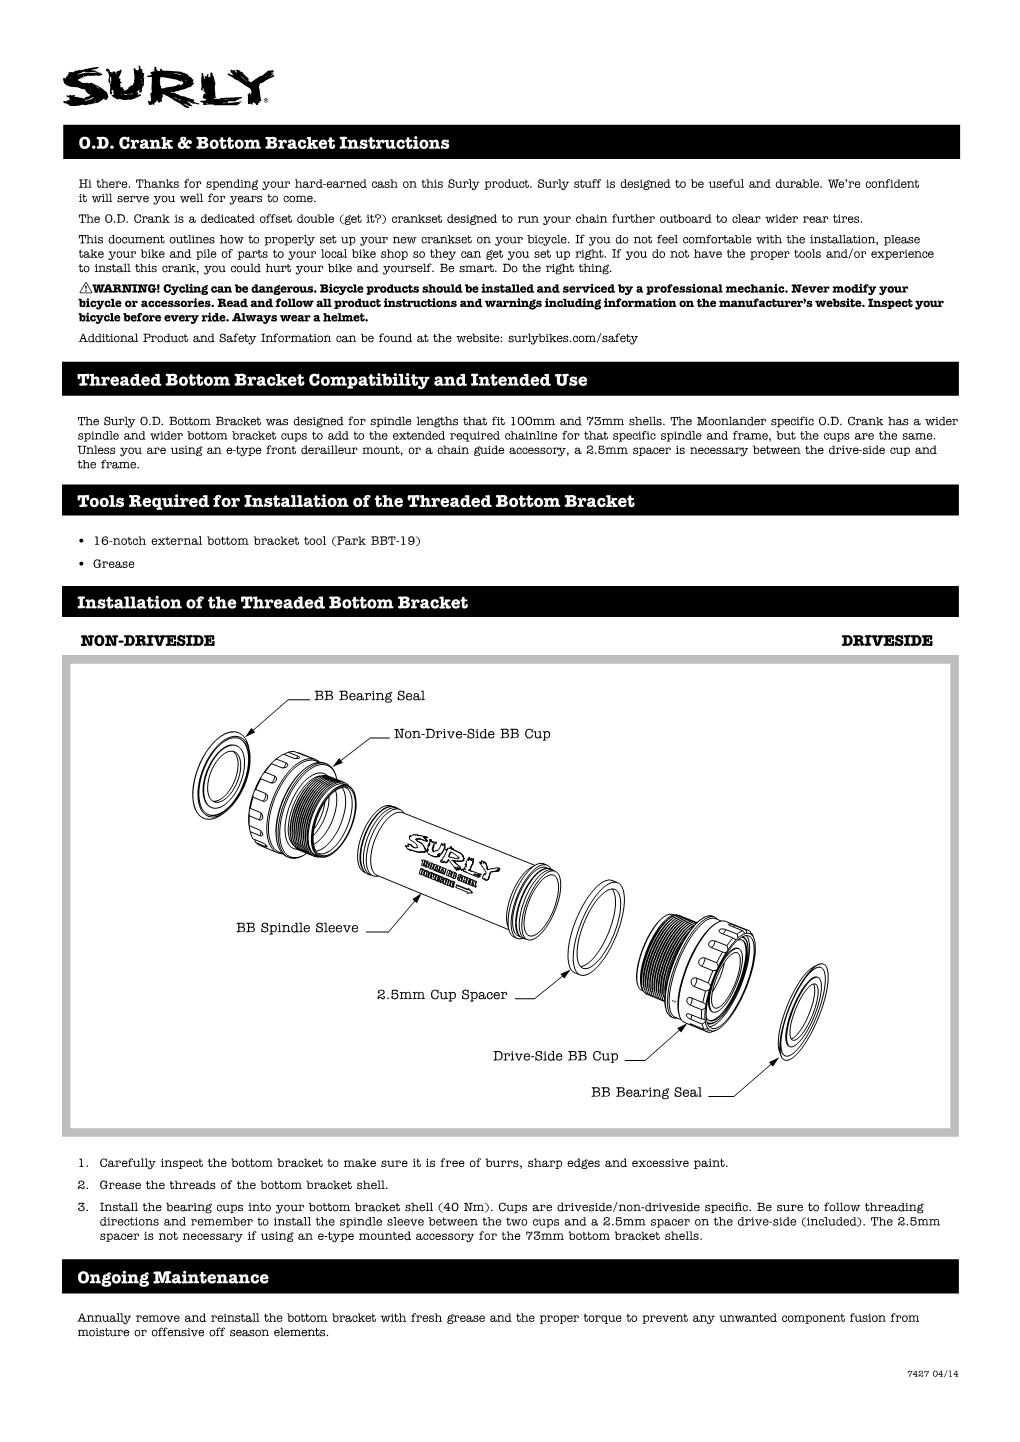 O.D. Crank & Bottom Bracket Instructions Tools Required For